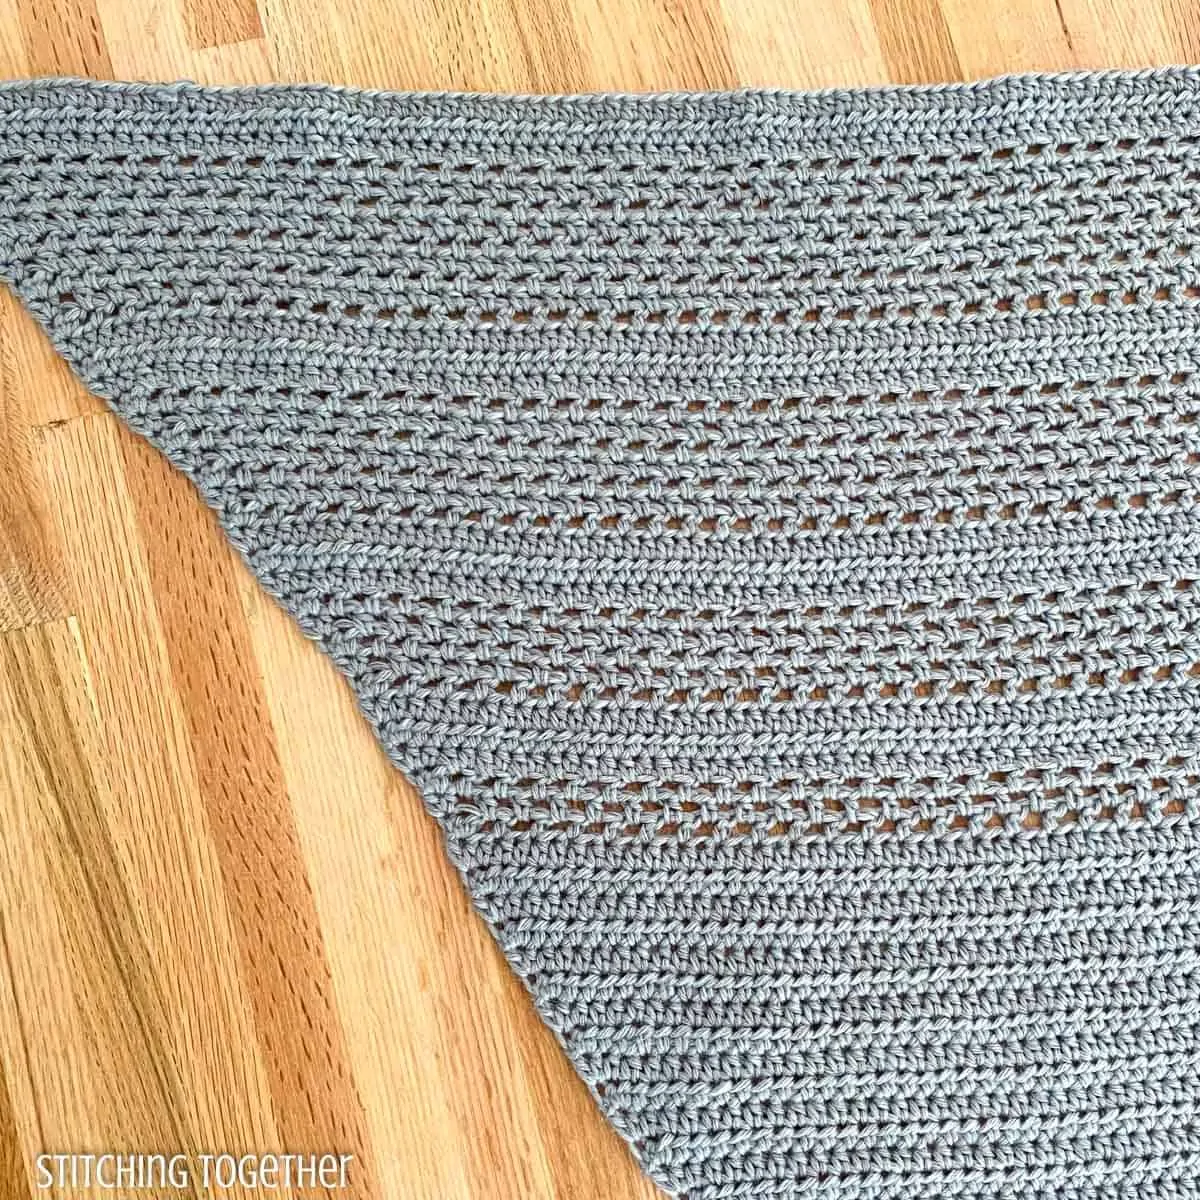 close up of crochet stitches in shawl